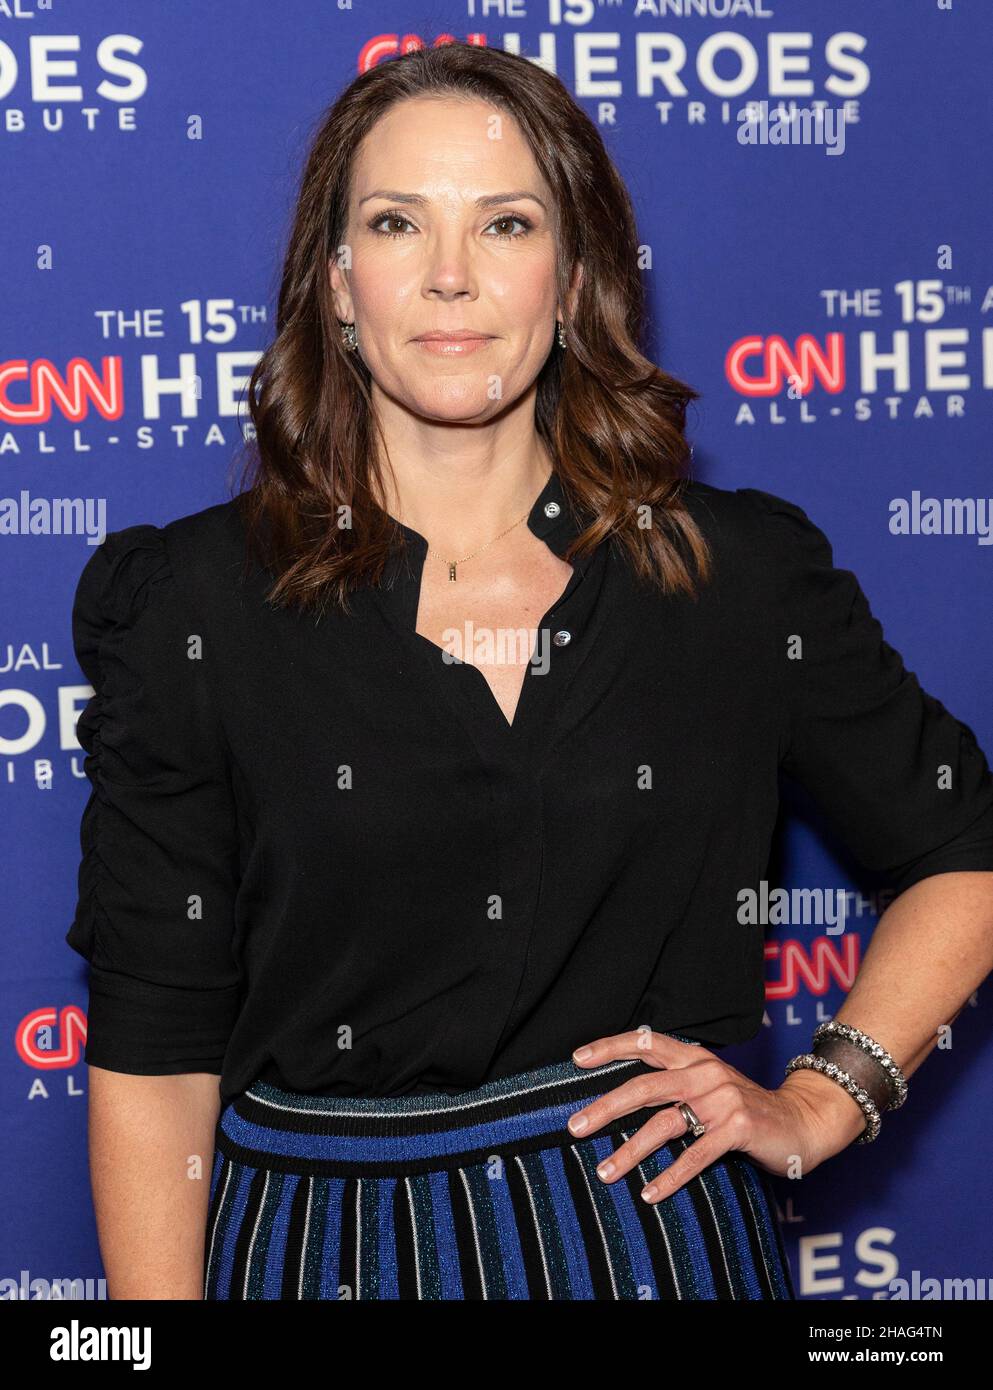 New York, NY - December 12, 2021: CNN anchor Erica Hill attends 15th Annual CNN Heroes All-Star Tribute at American Museum of Natural History Stock Photo